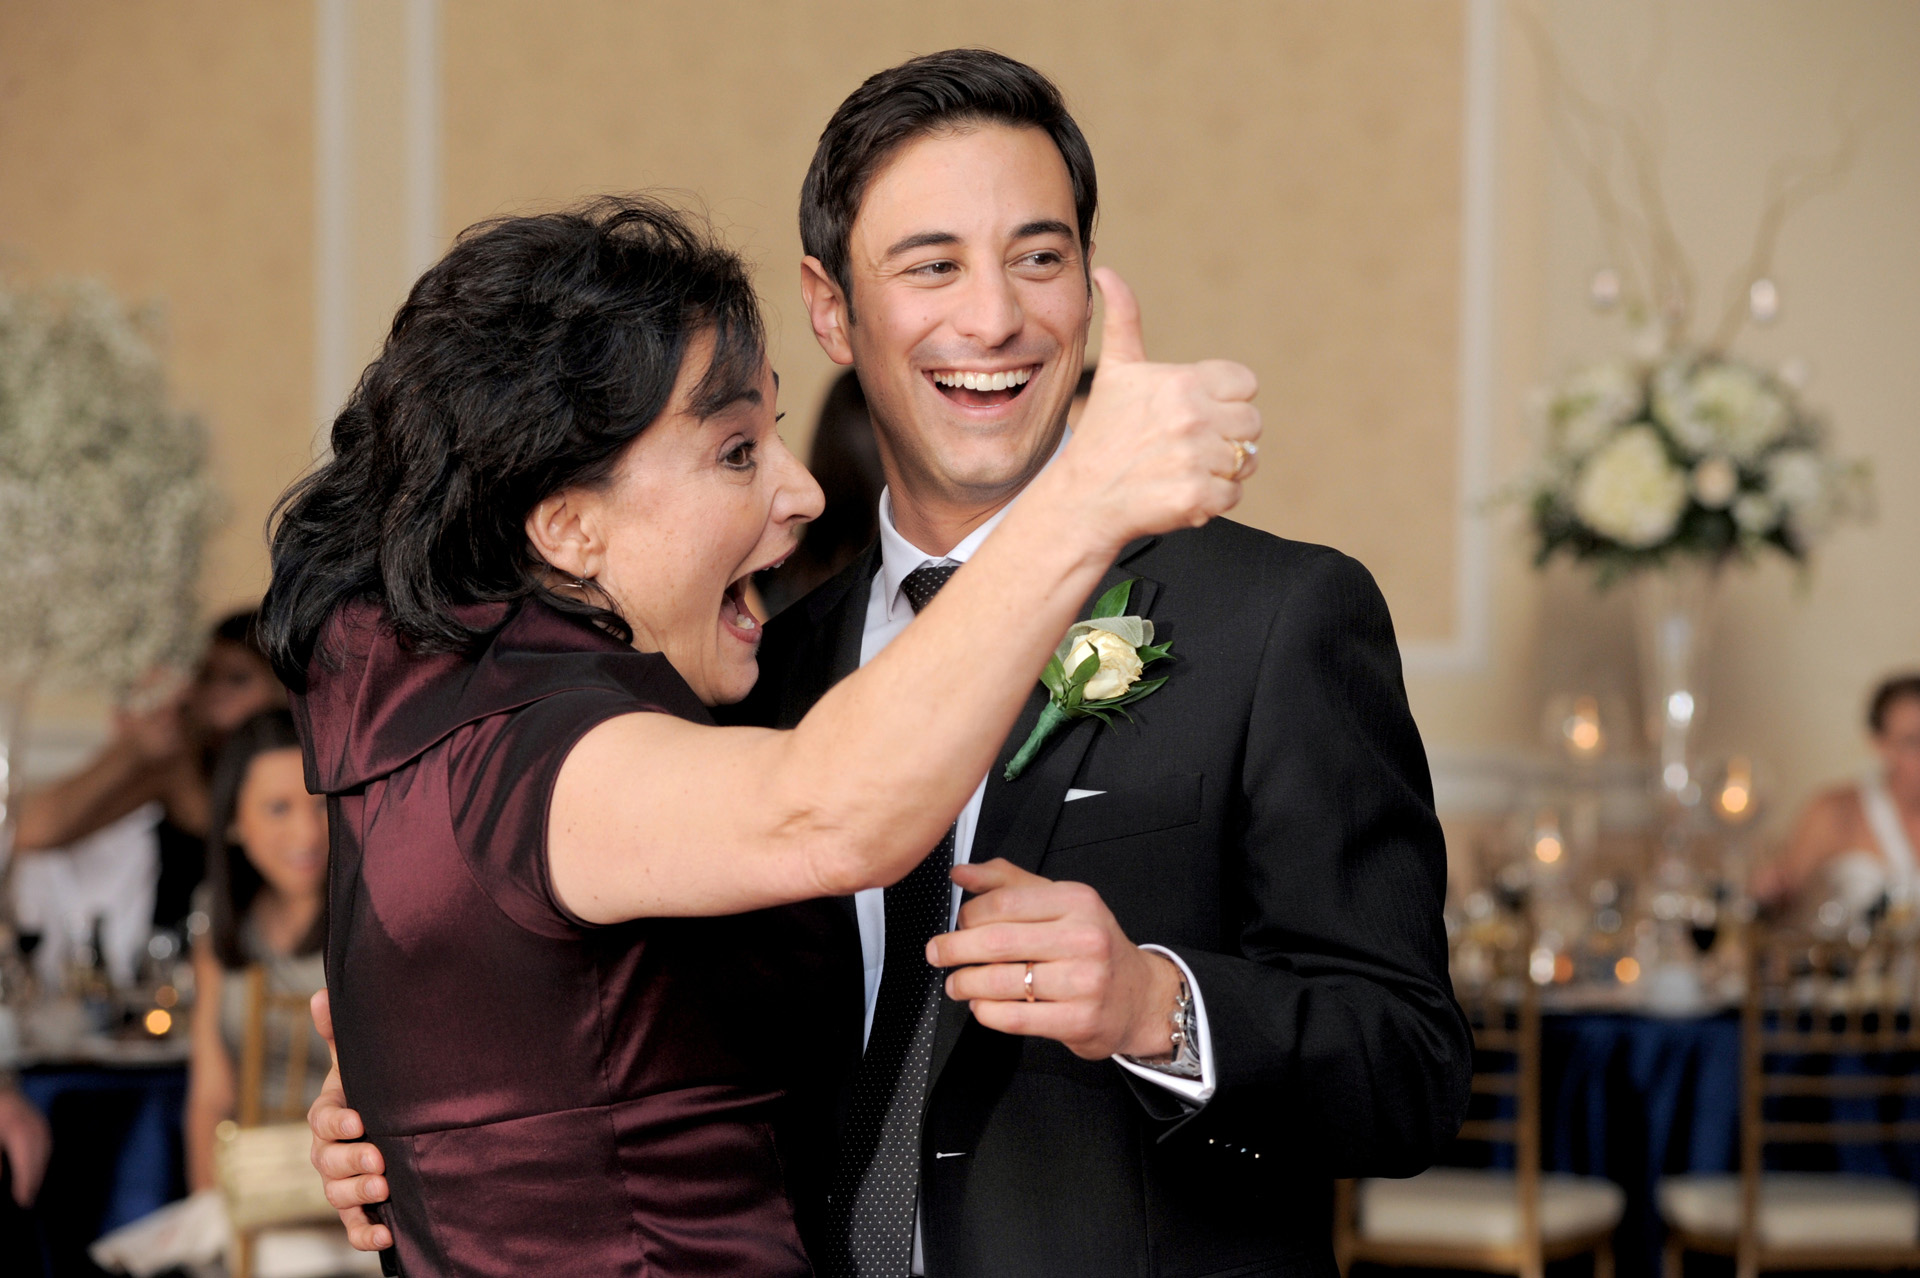 The Historic church Sweetest Heart of Mary and the Dearborn Inn of Detroit's historic church in Detroit and Dearborn, Michigan wedding photographer's photo of the mother / son dance at the wedding reception at the Dearborn Inn in Dearborn, Michigan..